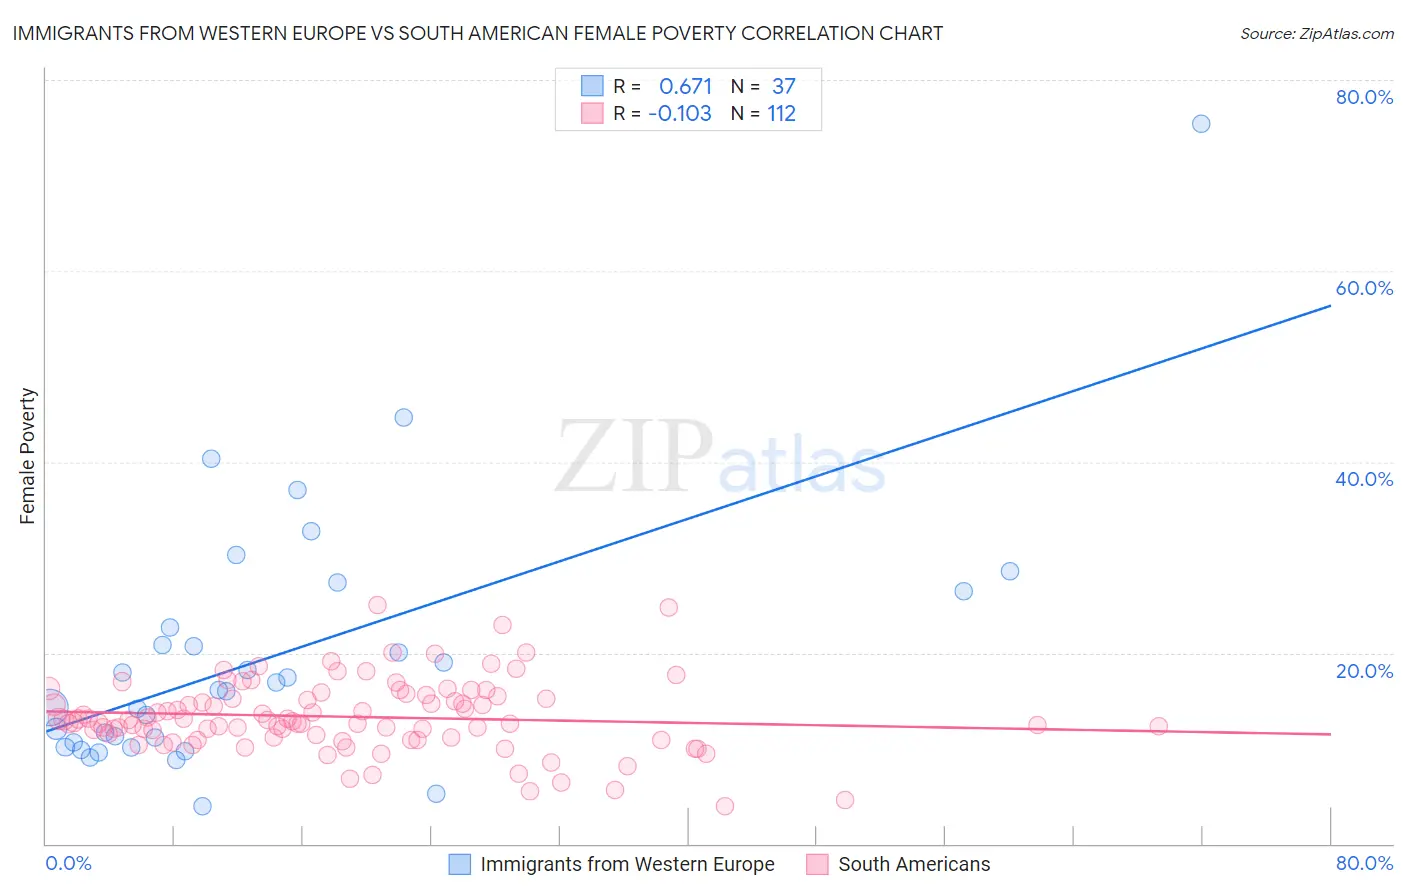 Immigrants from Western Europe vs South American Female Poverty